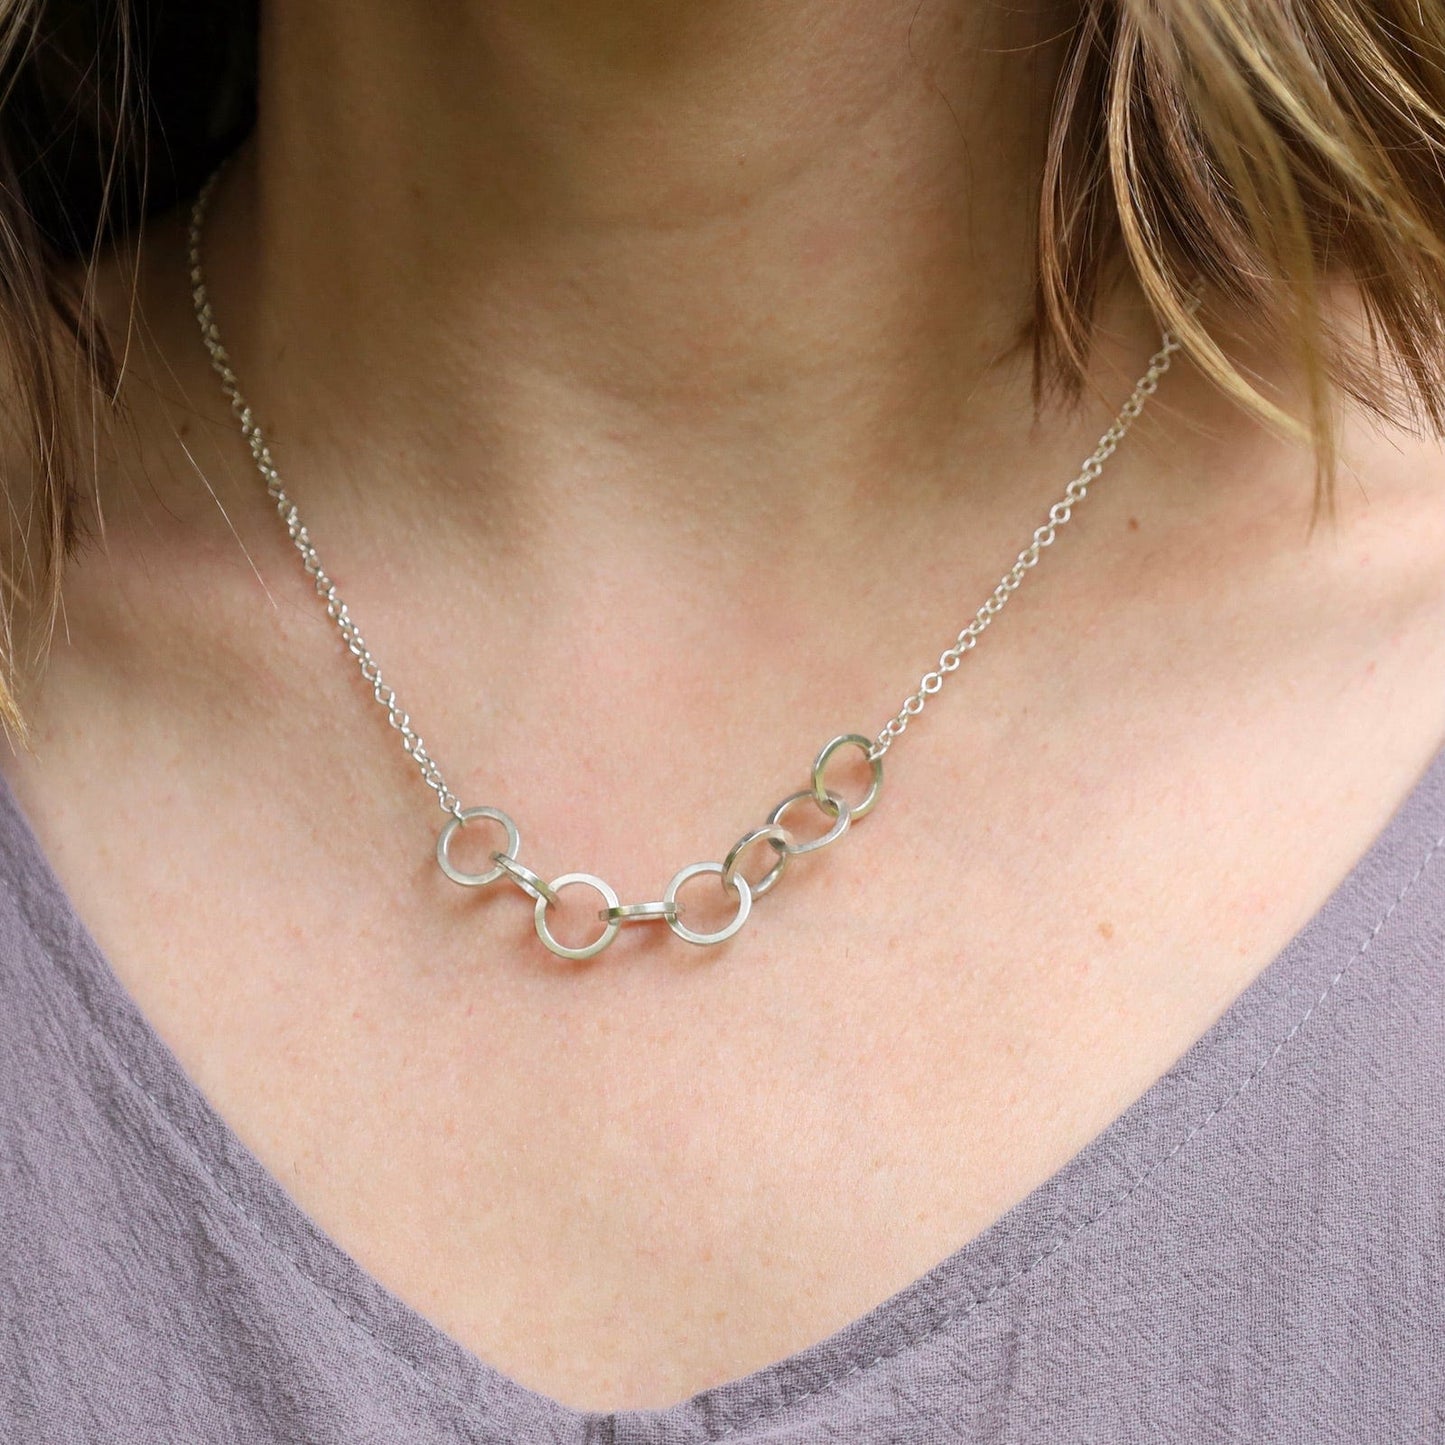 NKL Circle Link Chain Necklace in Polished Silver